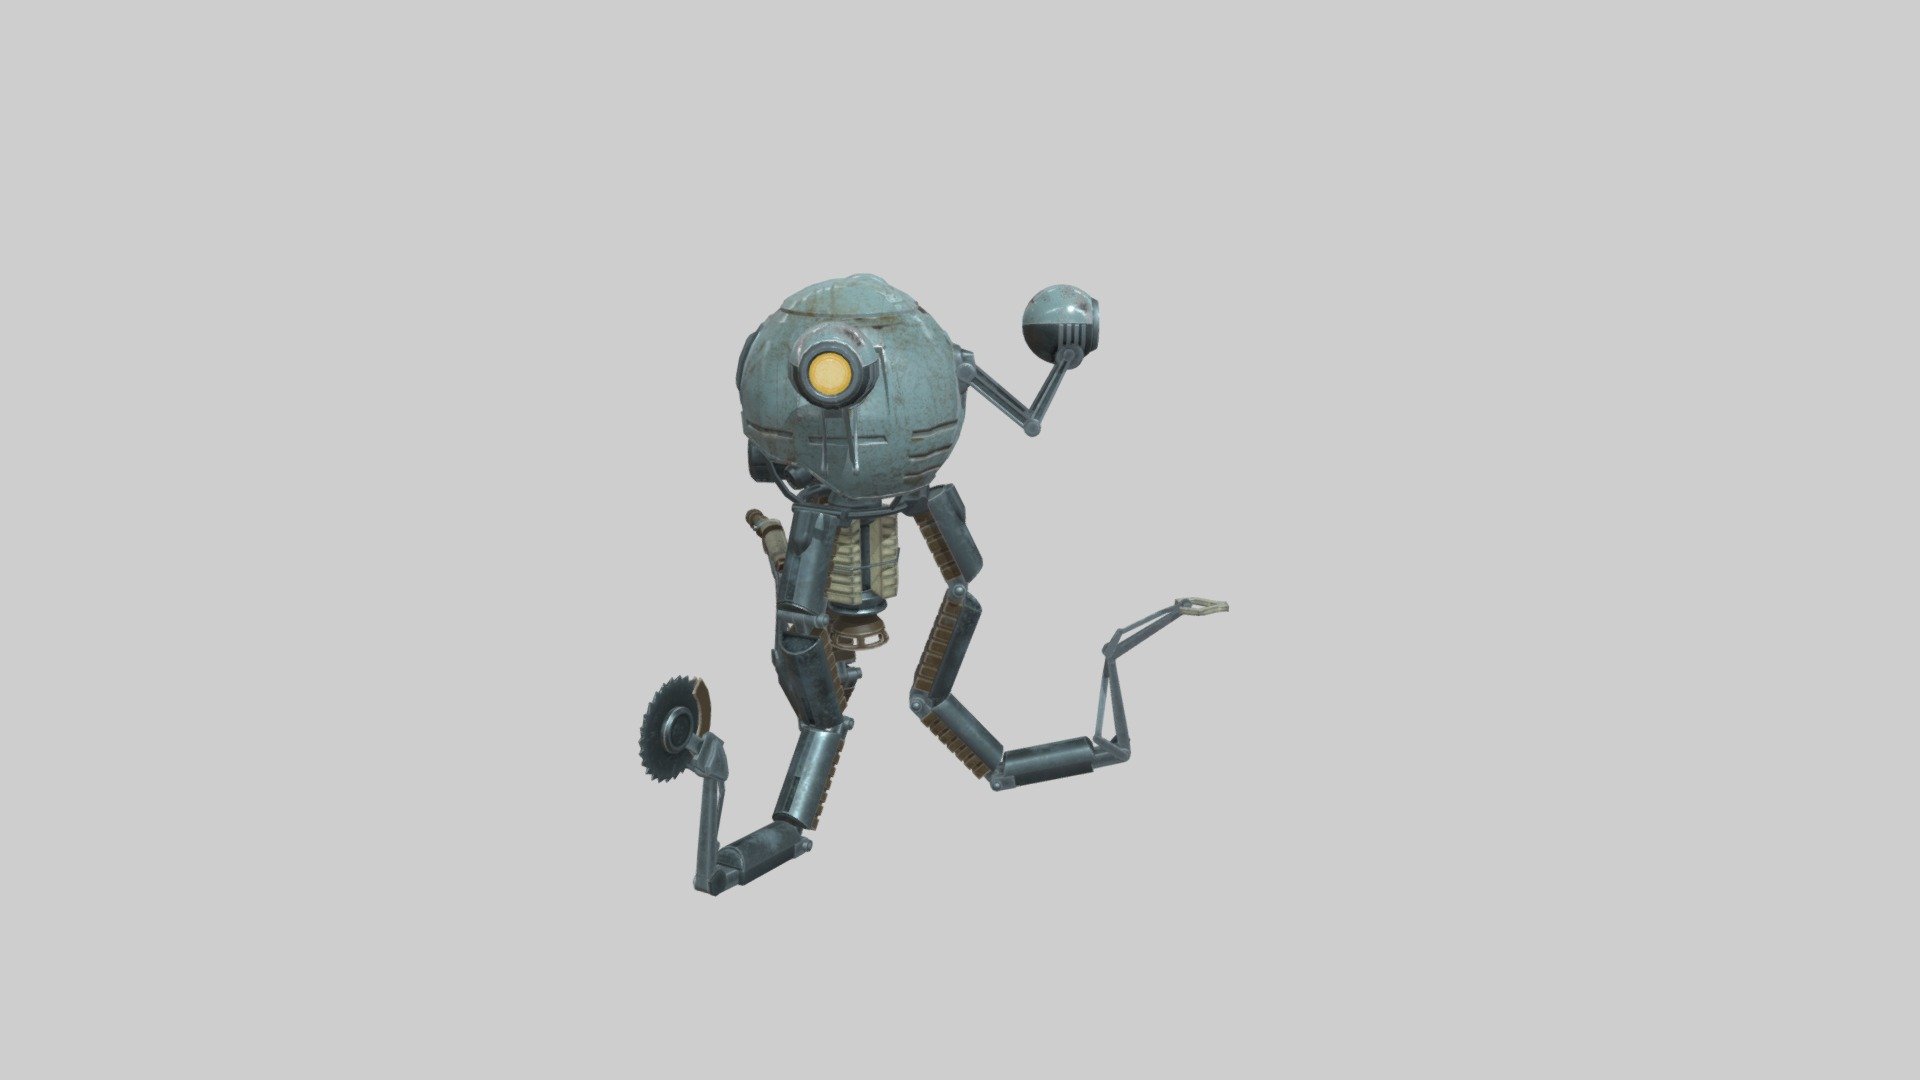 Mister Handy robot from Fallout 3, modelled for a module at University 3d model